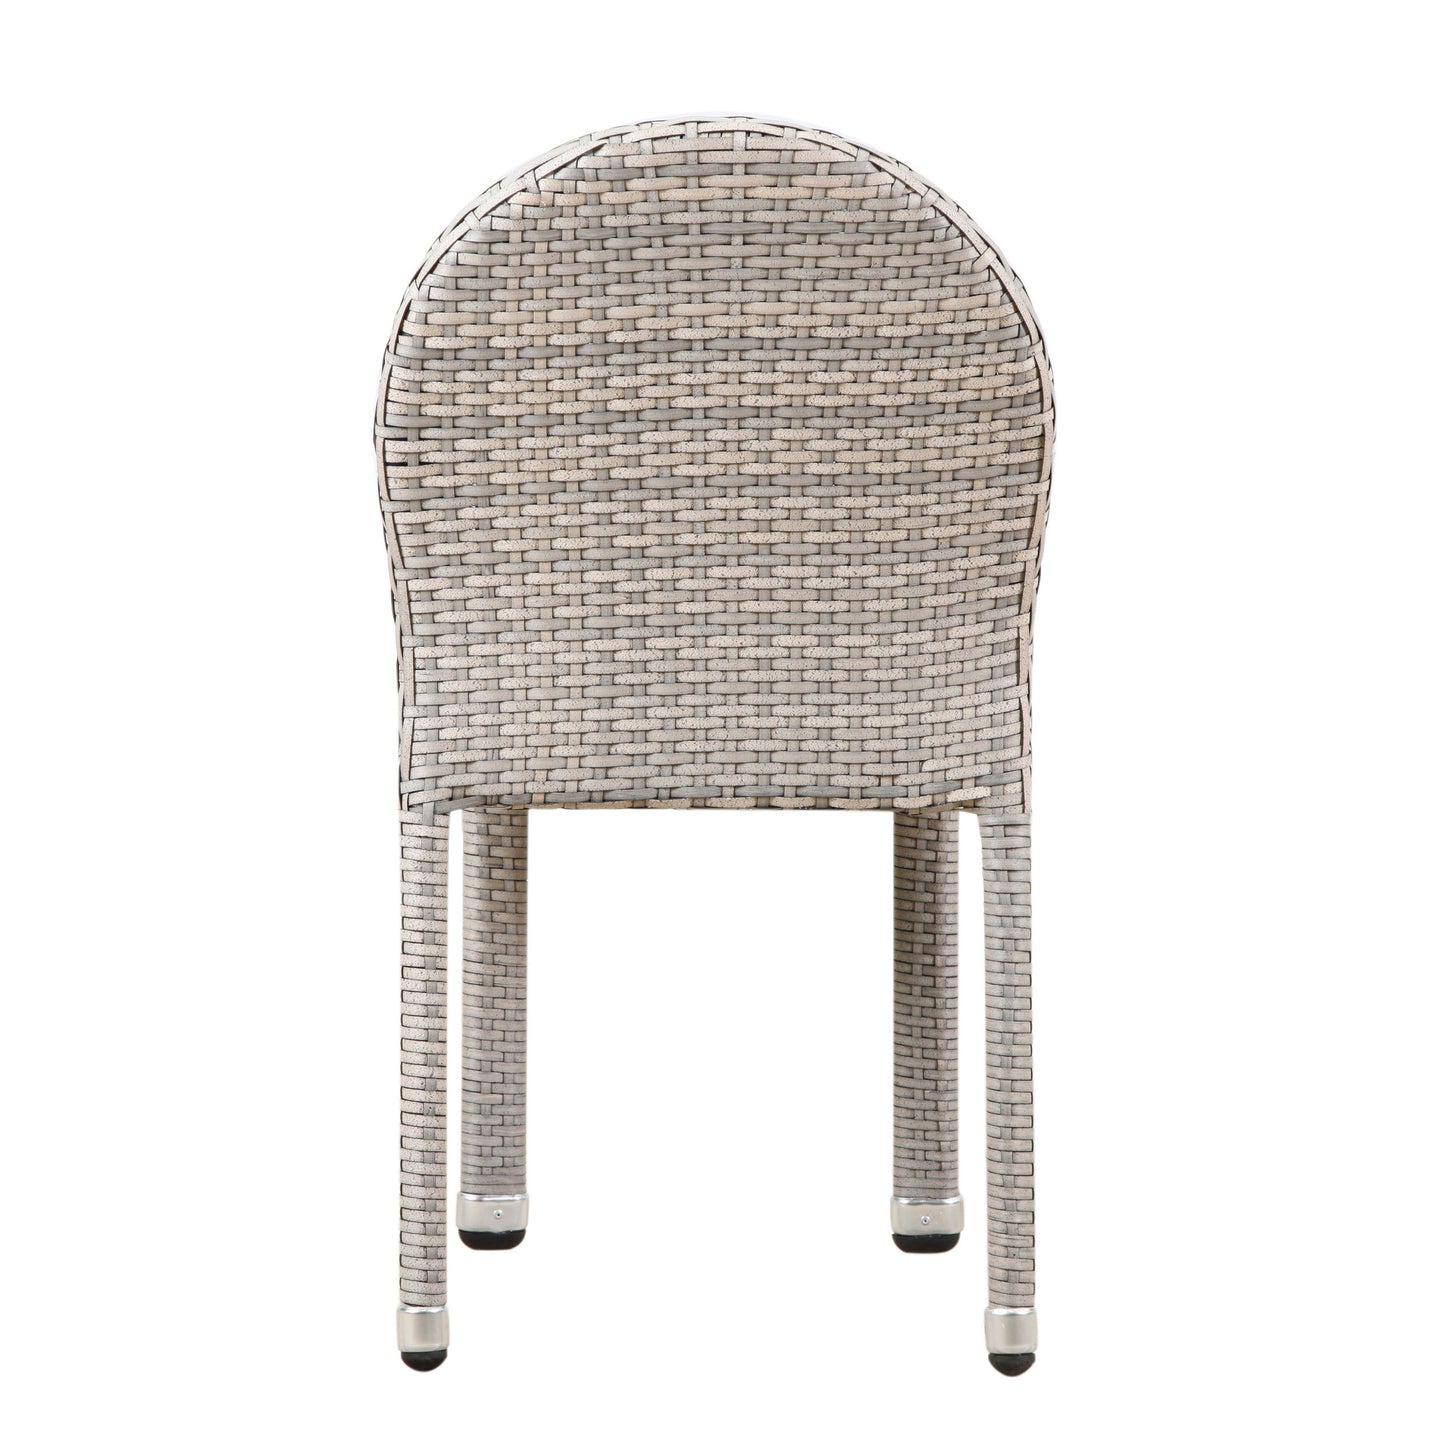 Amallie Outdoor Wicker Stacking Chairs with an Aluminum Frame (Set of 4)